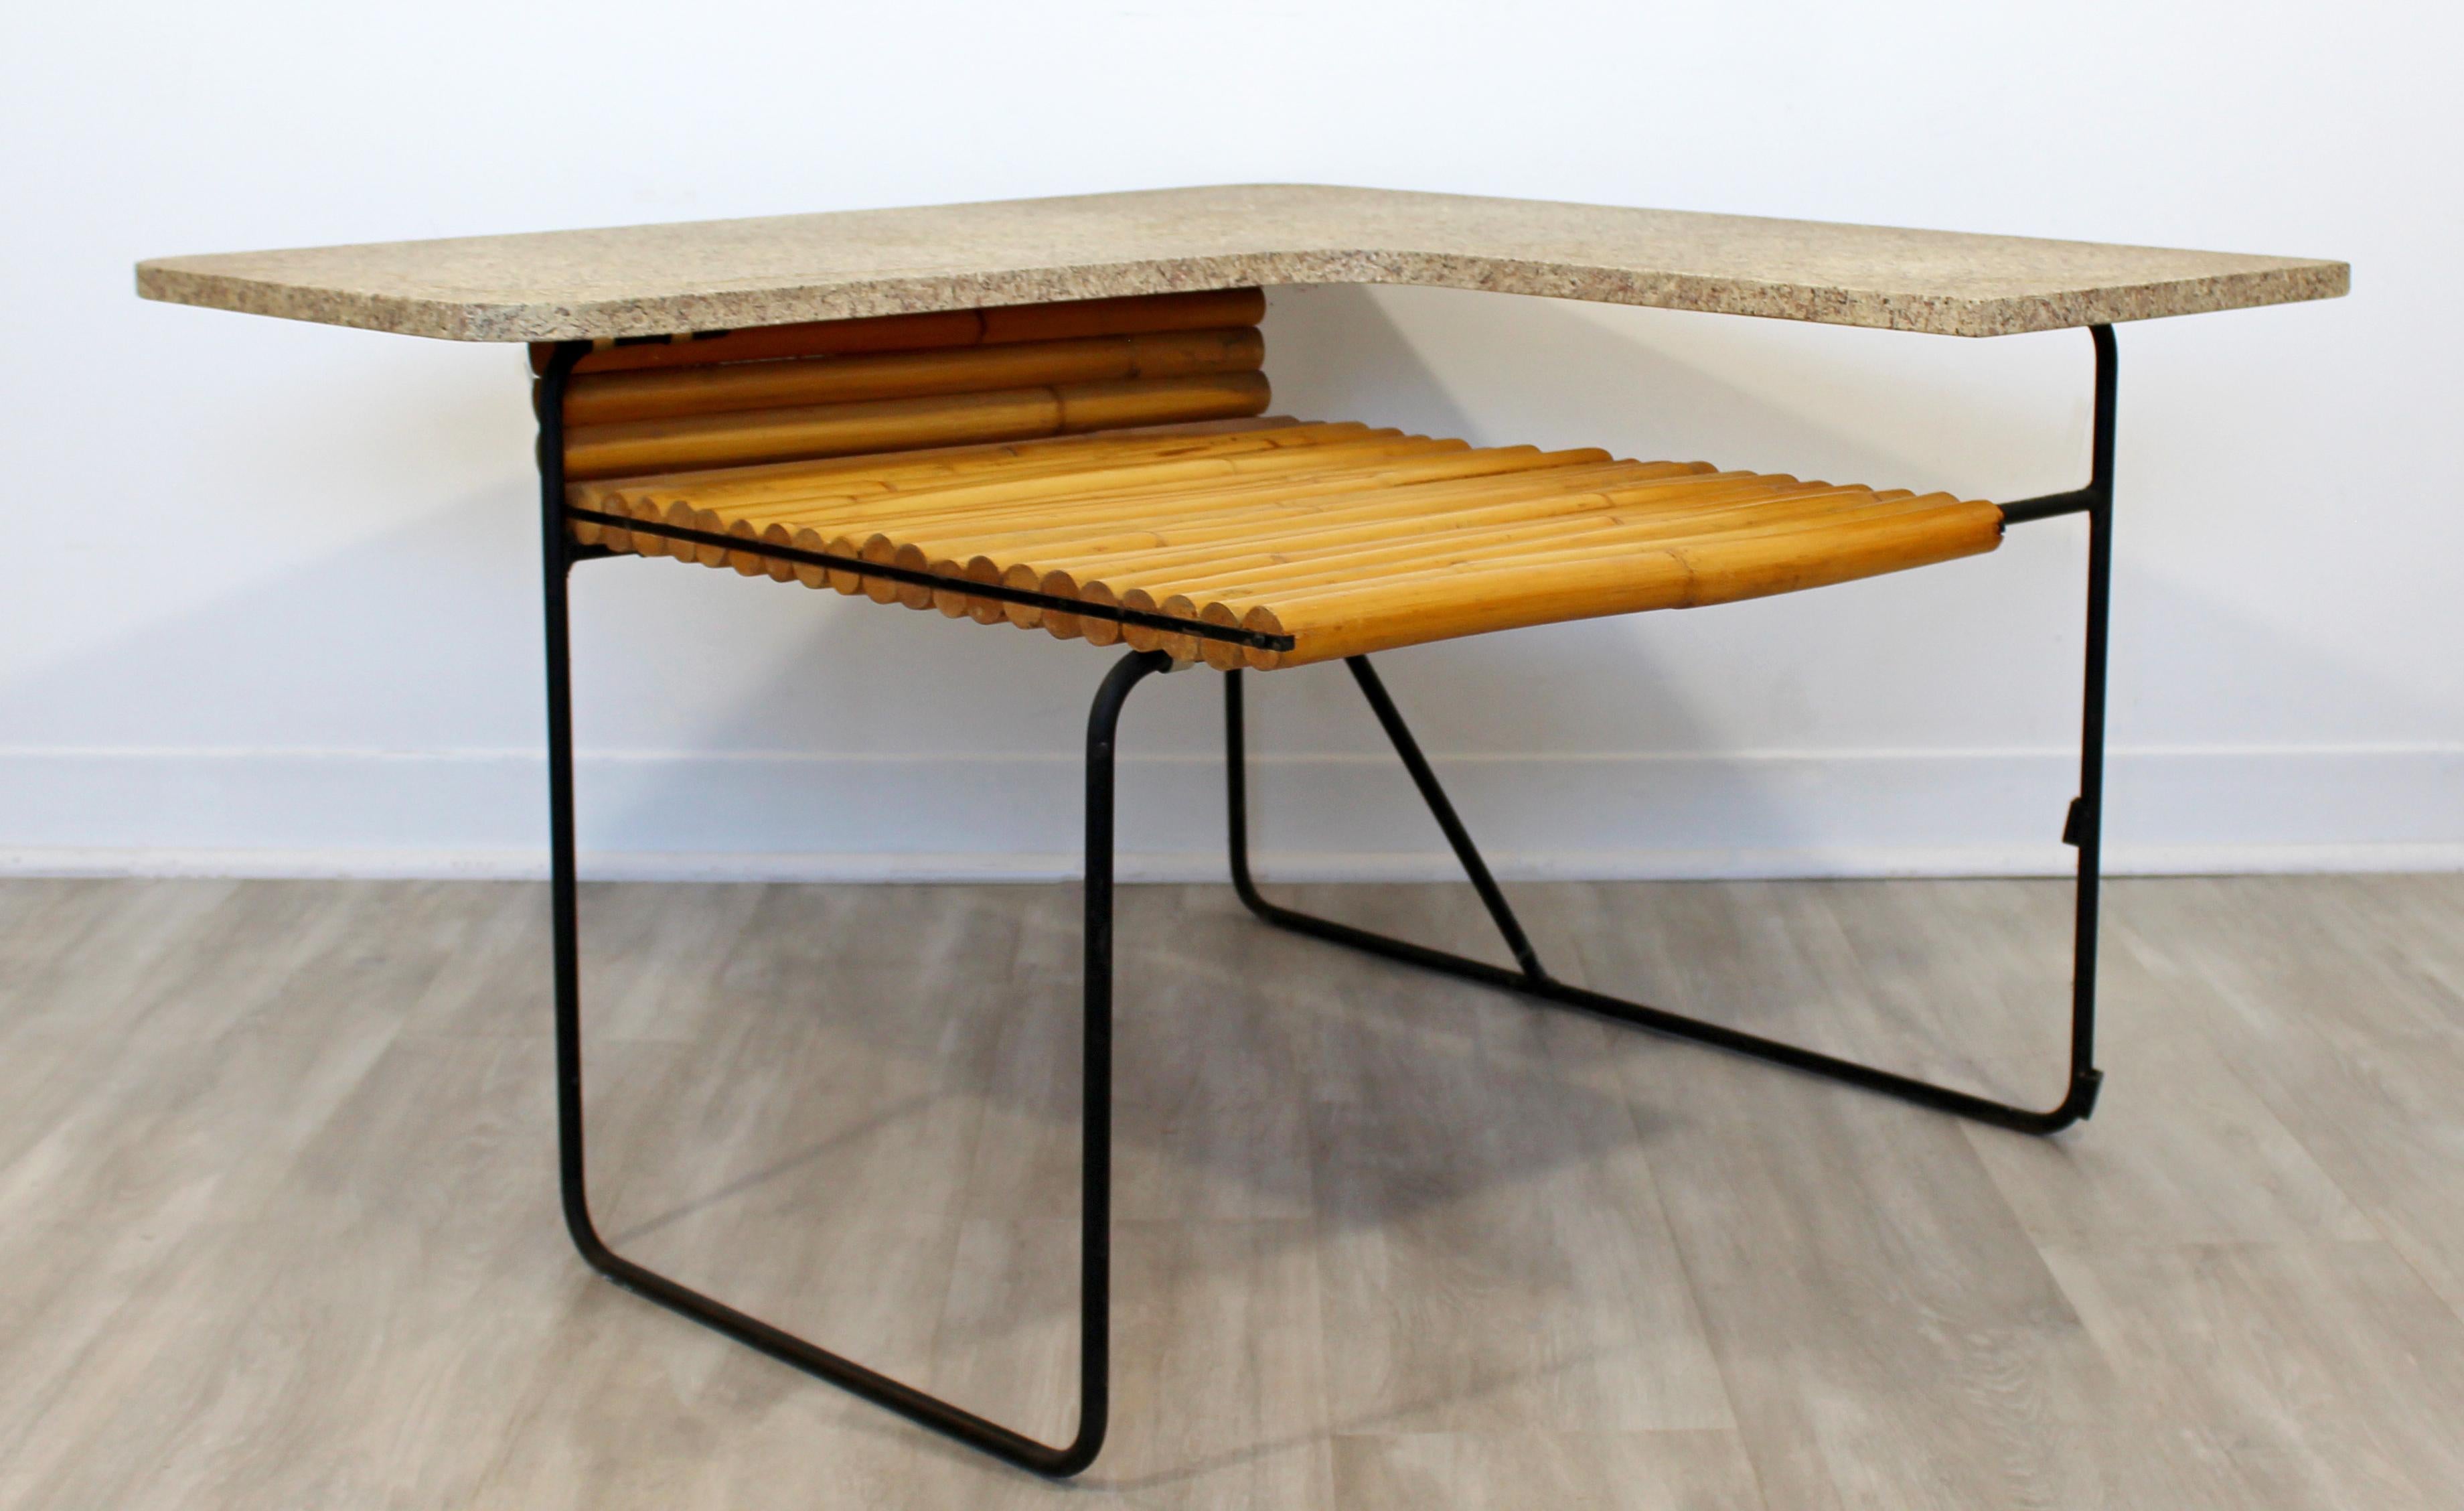 For your consideration is a sensational, bamboo and wrought iron, two-tiered coffee table, by Herbert and Shirley Ritts, circa 1950s. In good vintage condition. The dimensions are 35